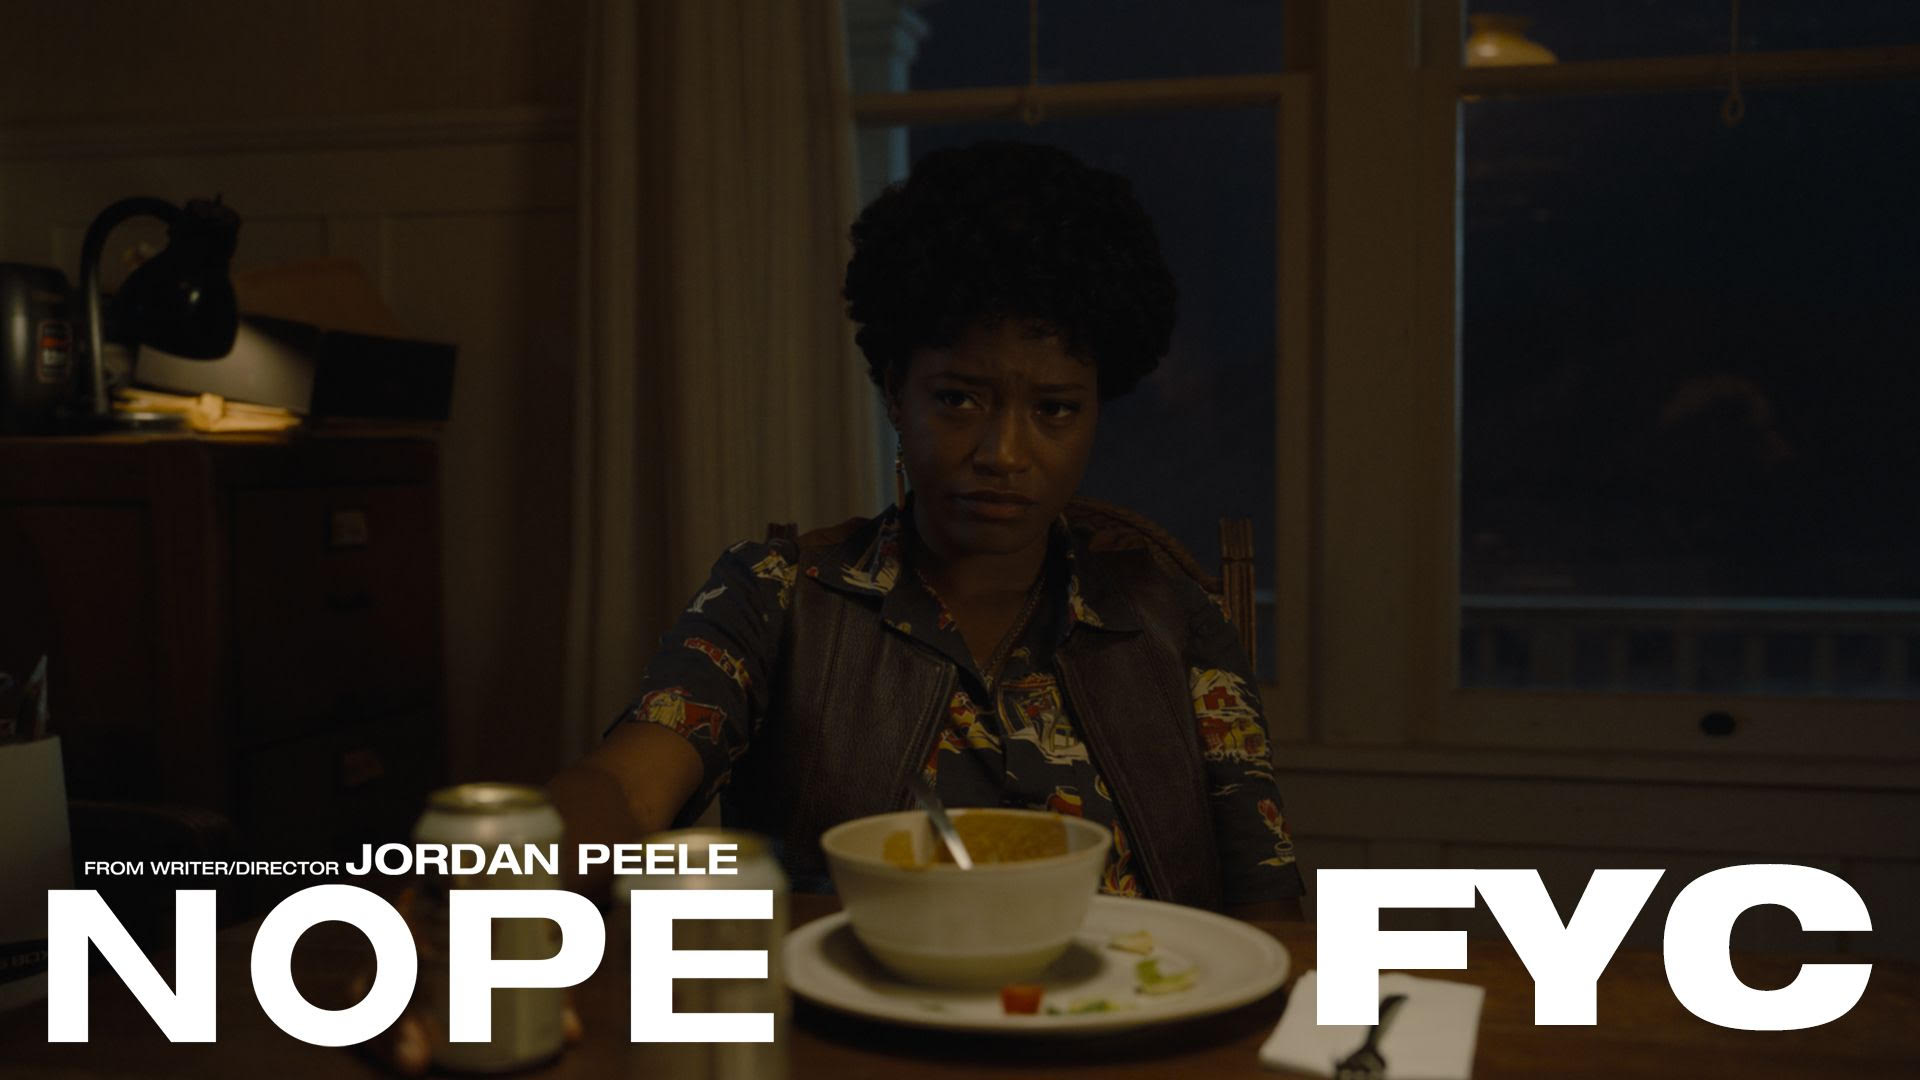 [News] For Your Consideration – A Brand New Trailer for Jordan Peele’s NOPE